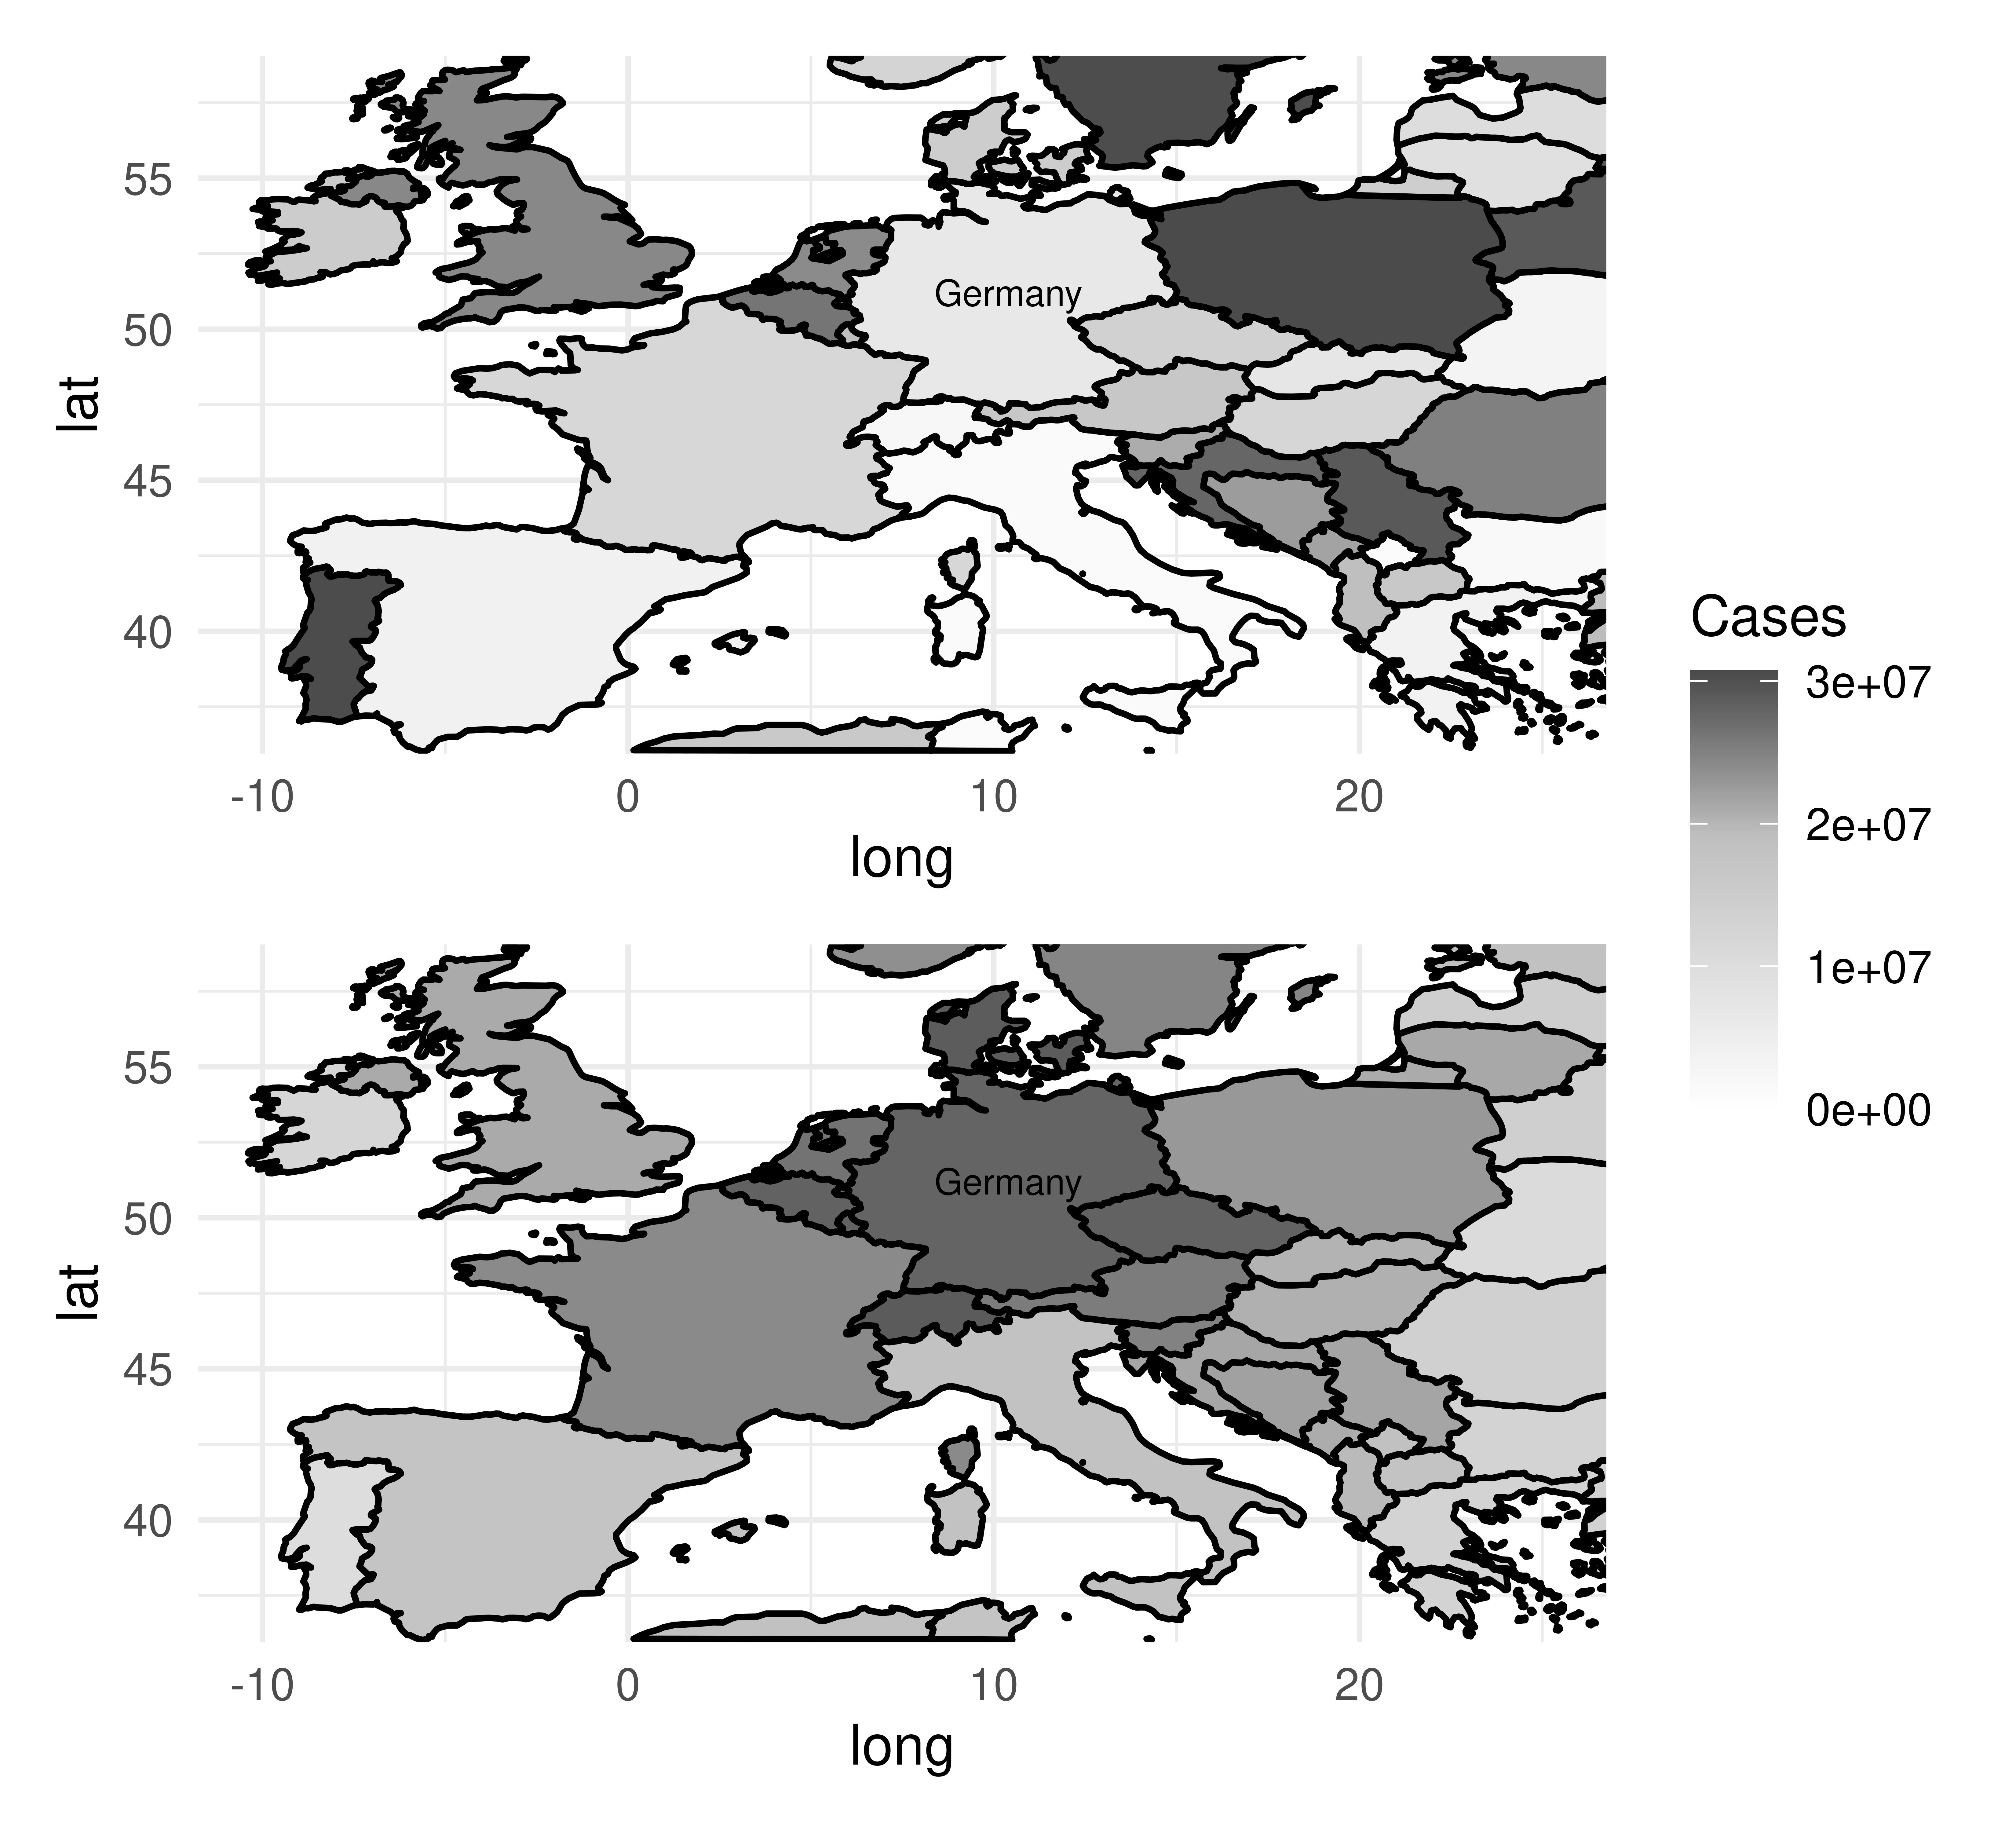 Image shows two separate maps of Europe. Top map has a random distribution of colors from white to dark gray. Bottom map shows darkest color (dark gray) at Germany with increasing lightness as the countries are increasingly further away.